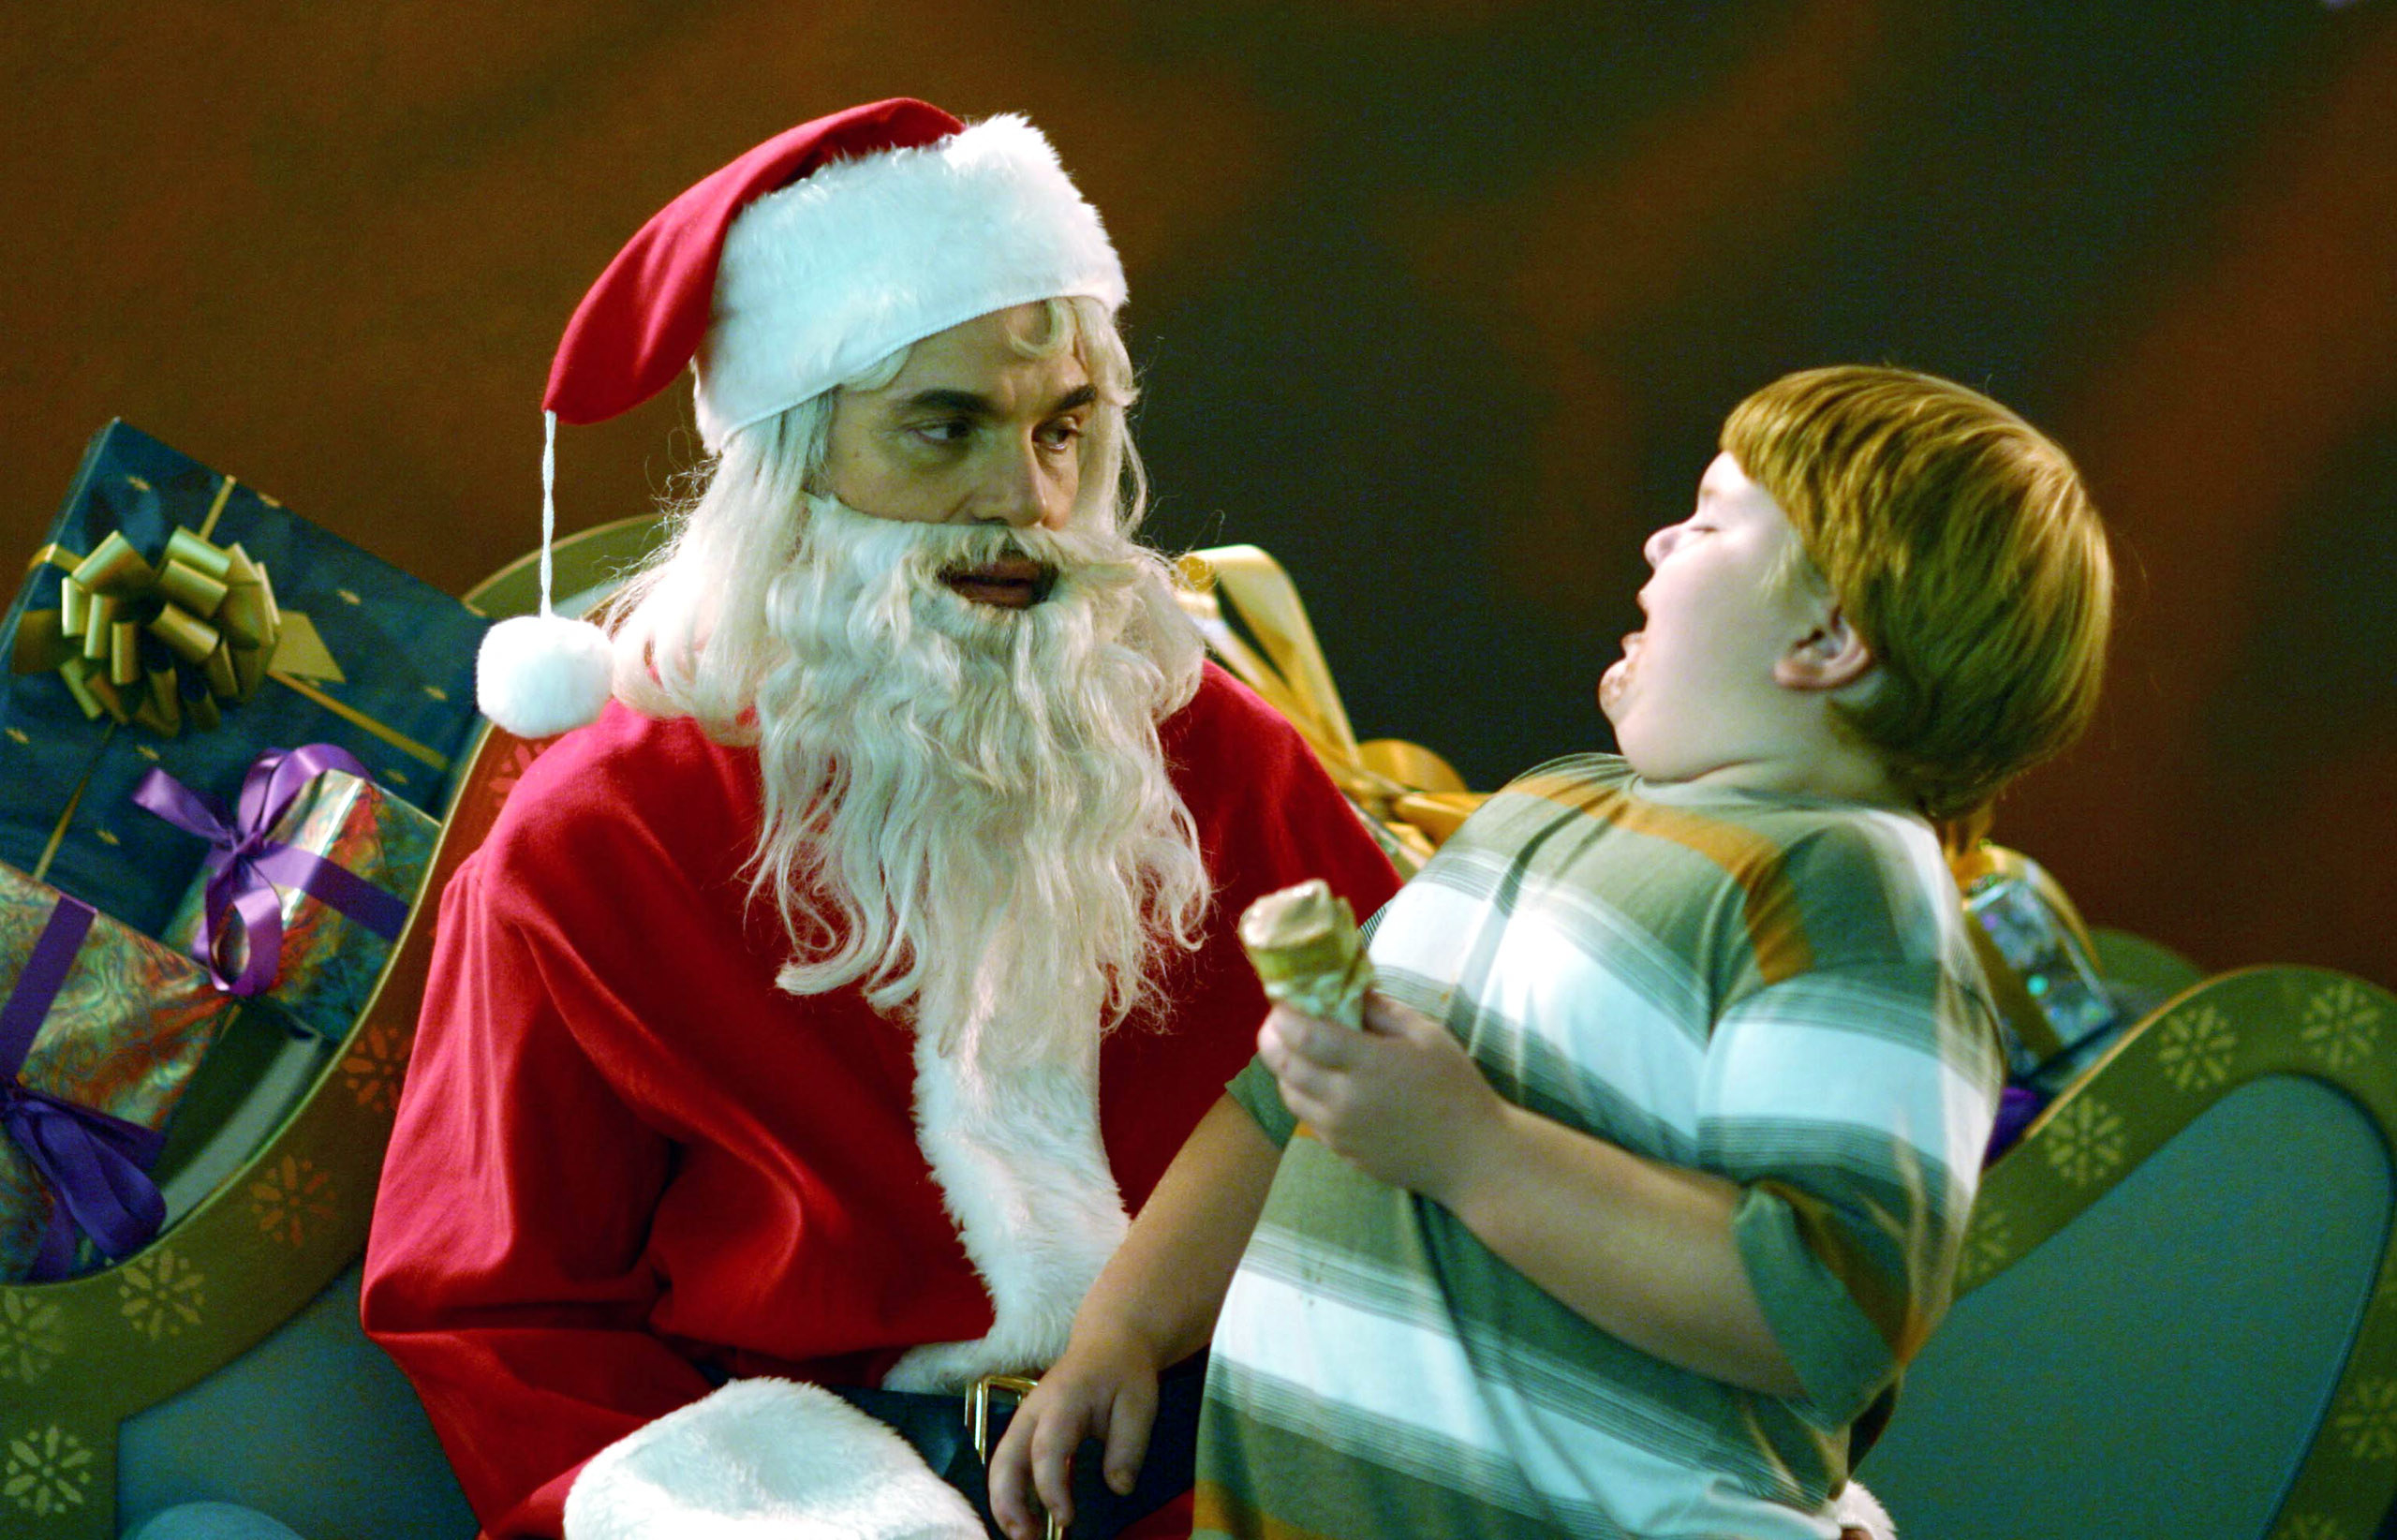 A miserable-looking Santa with a kid on his lap